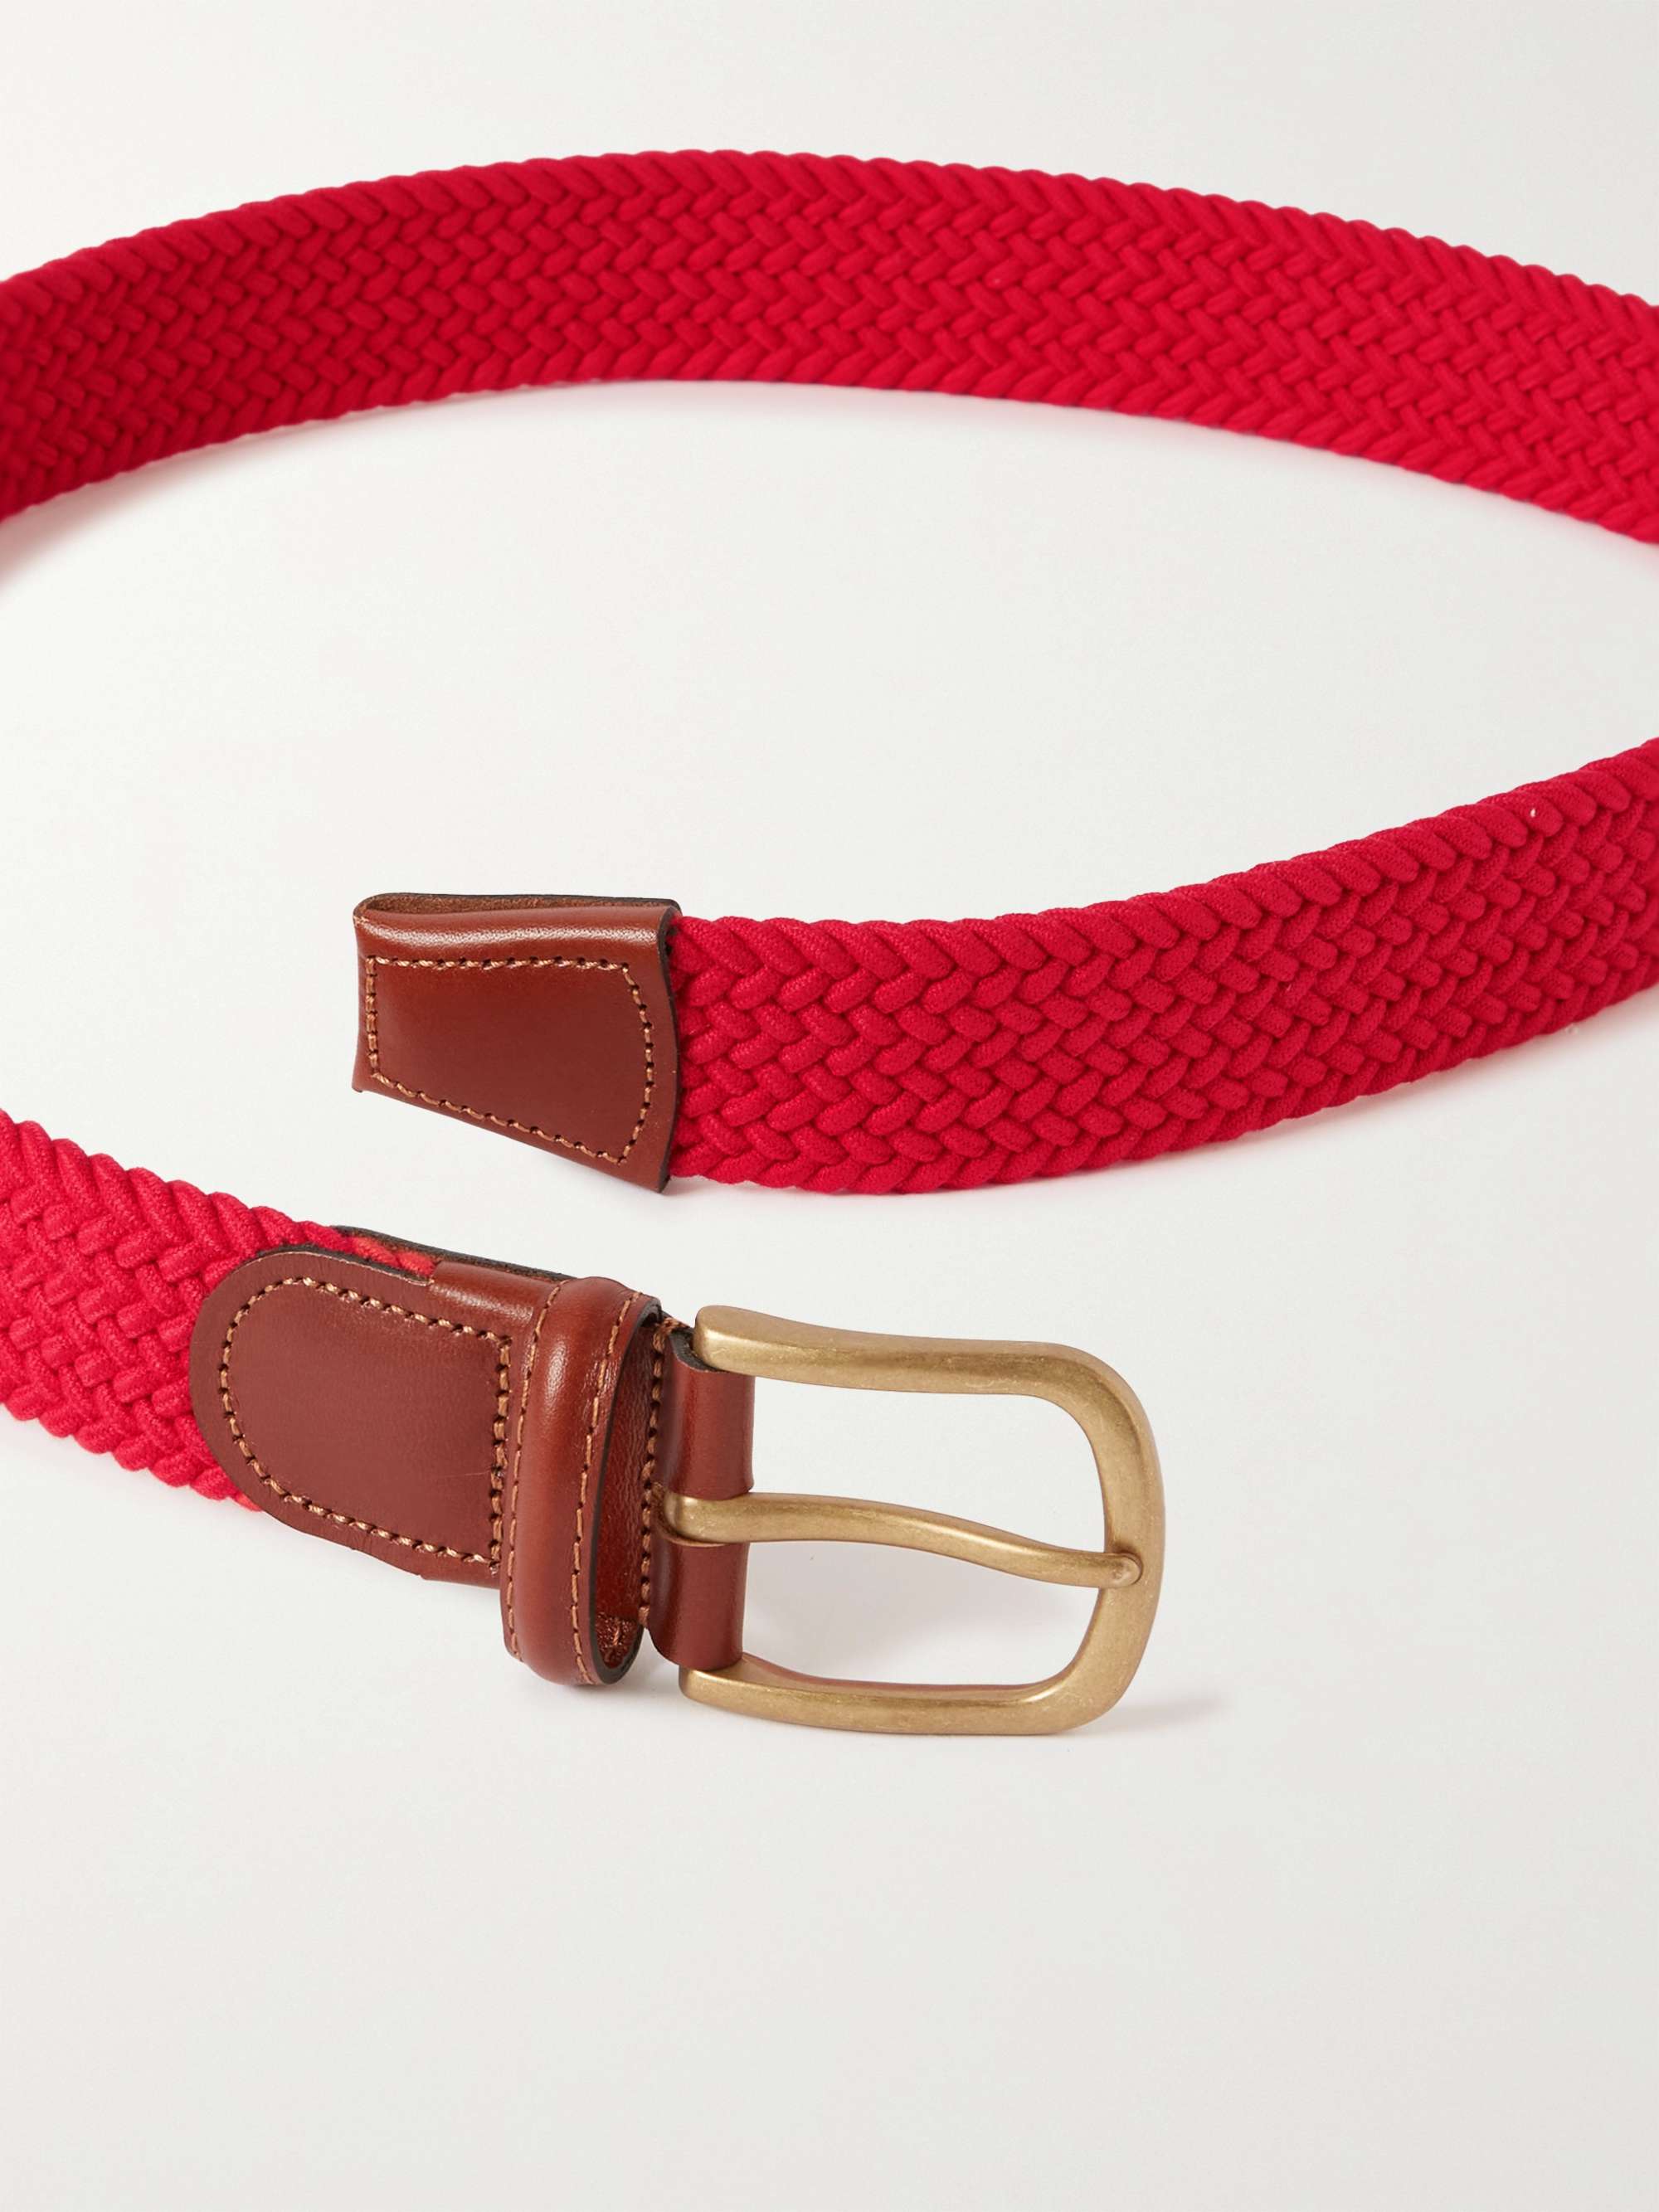 ANDERSON & SHEPPARD 3.5cm Leather-Trimmed Woven Cotton Belt